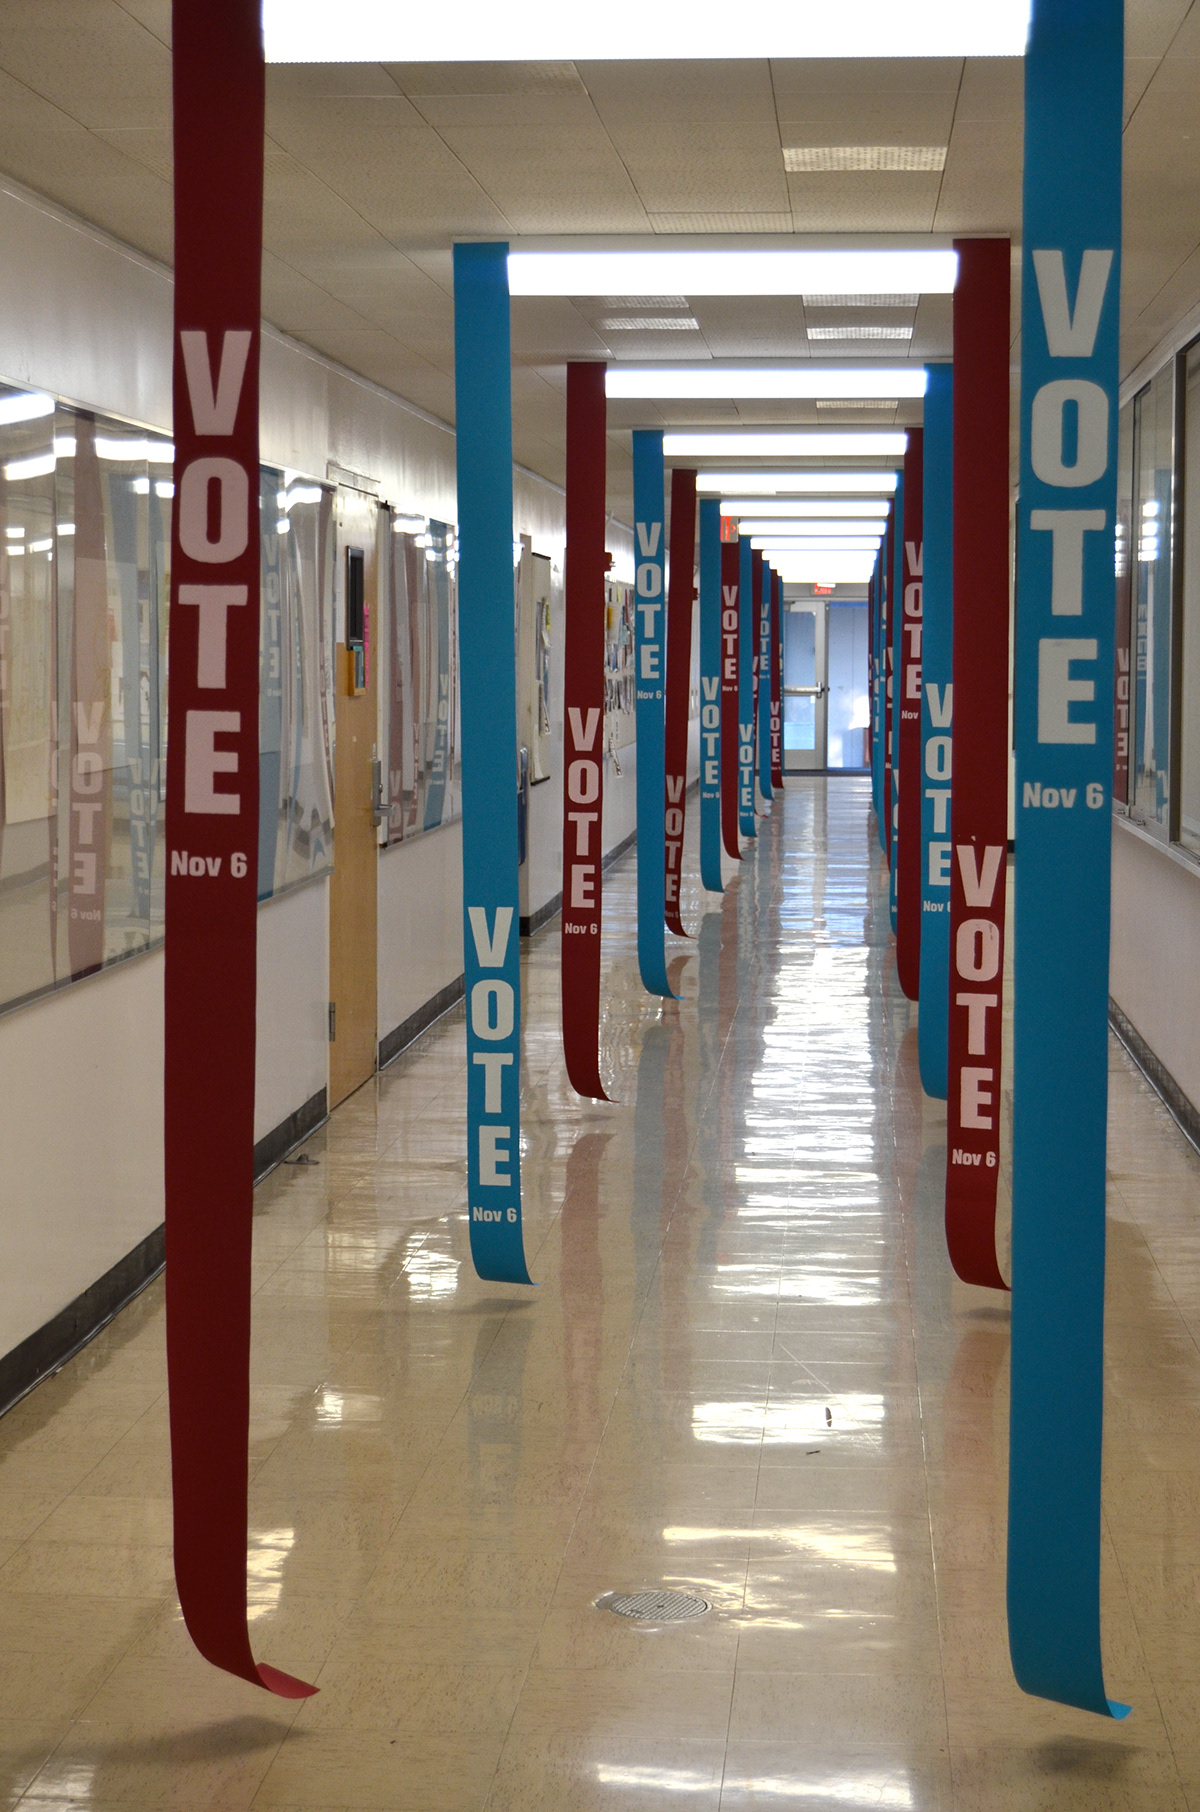 vote  2012  america  election  banners  hallway  November 6th